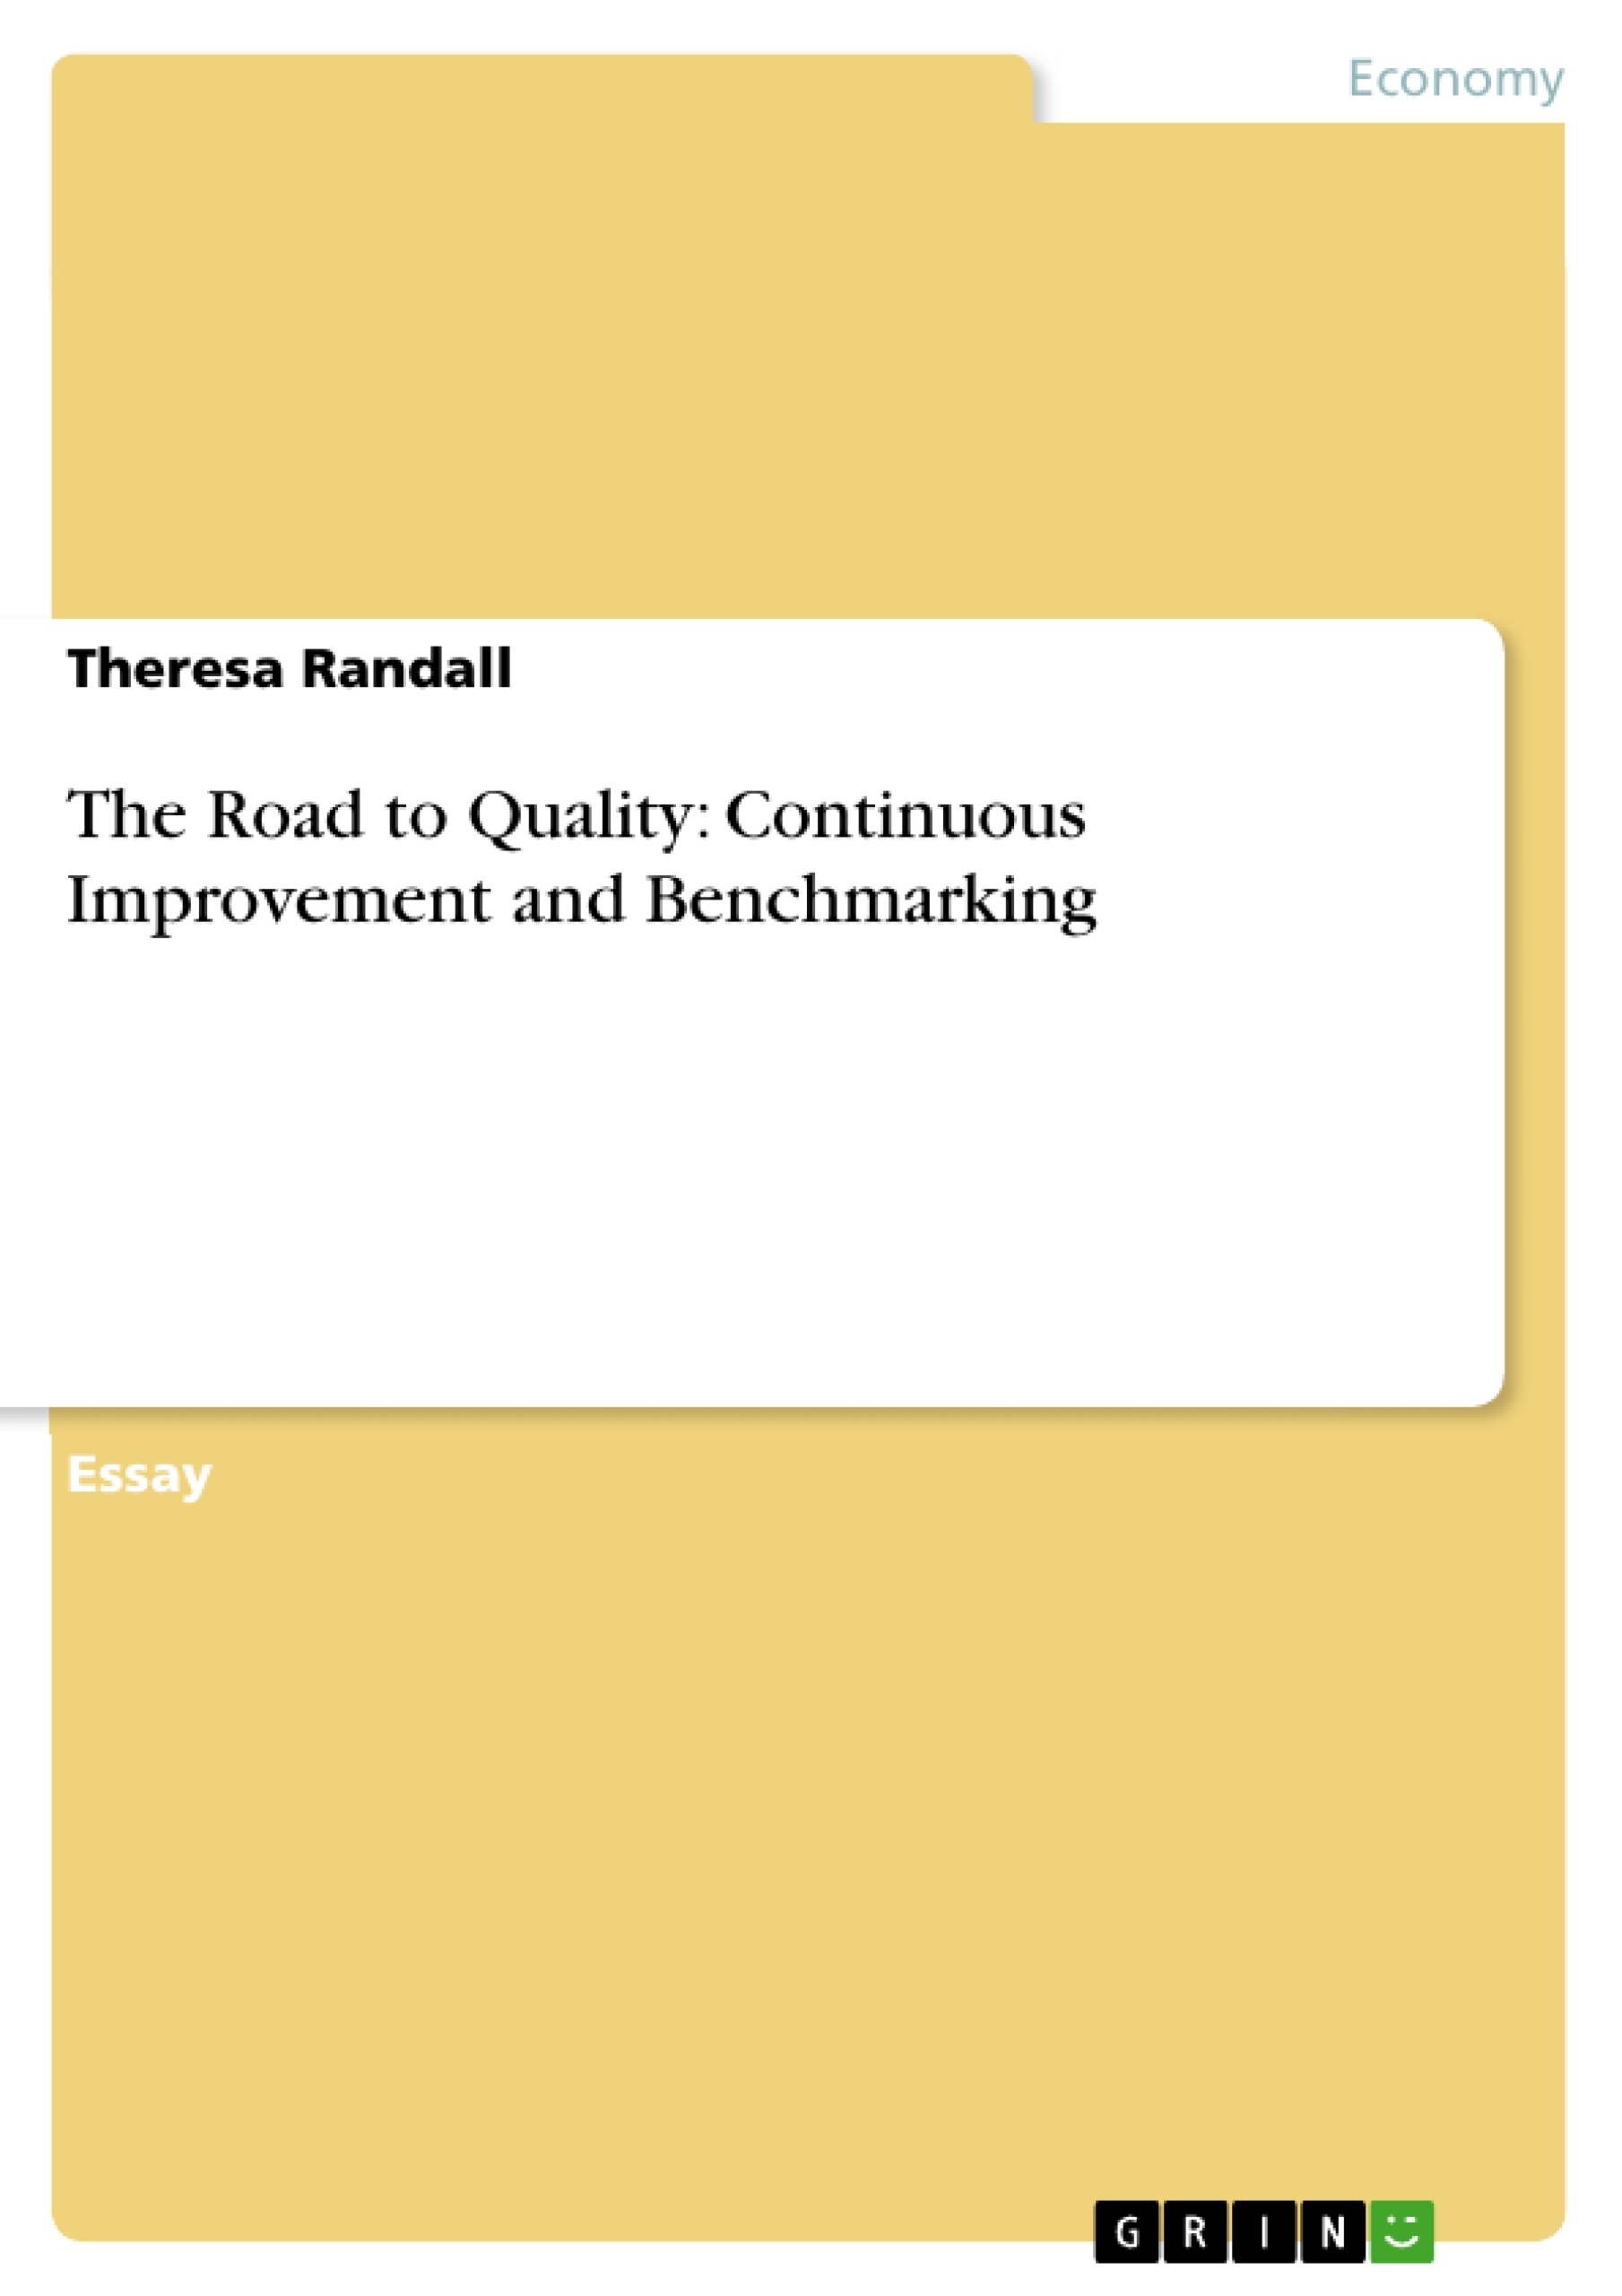 Title: The Road to Quality: Continuous Improvement and Benchmarking